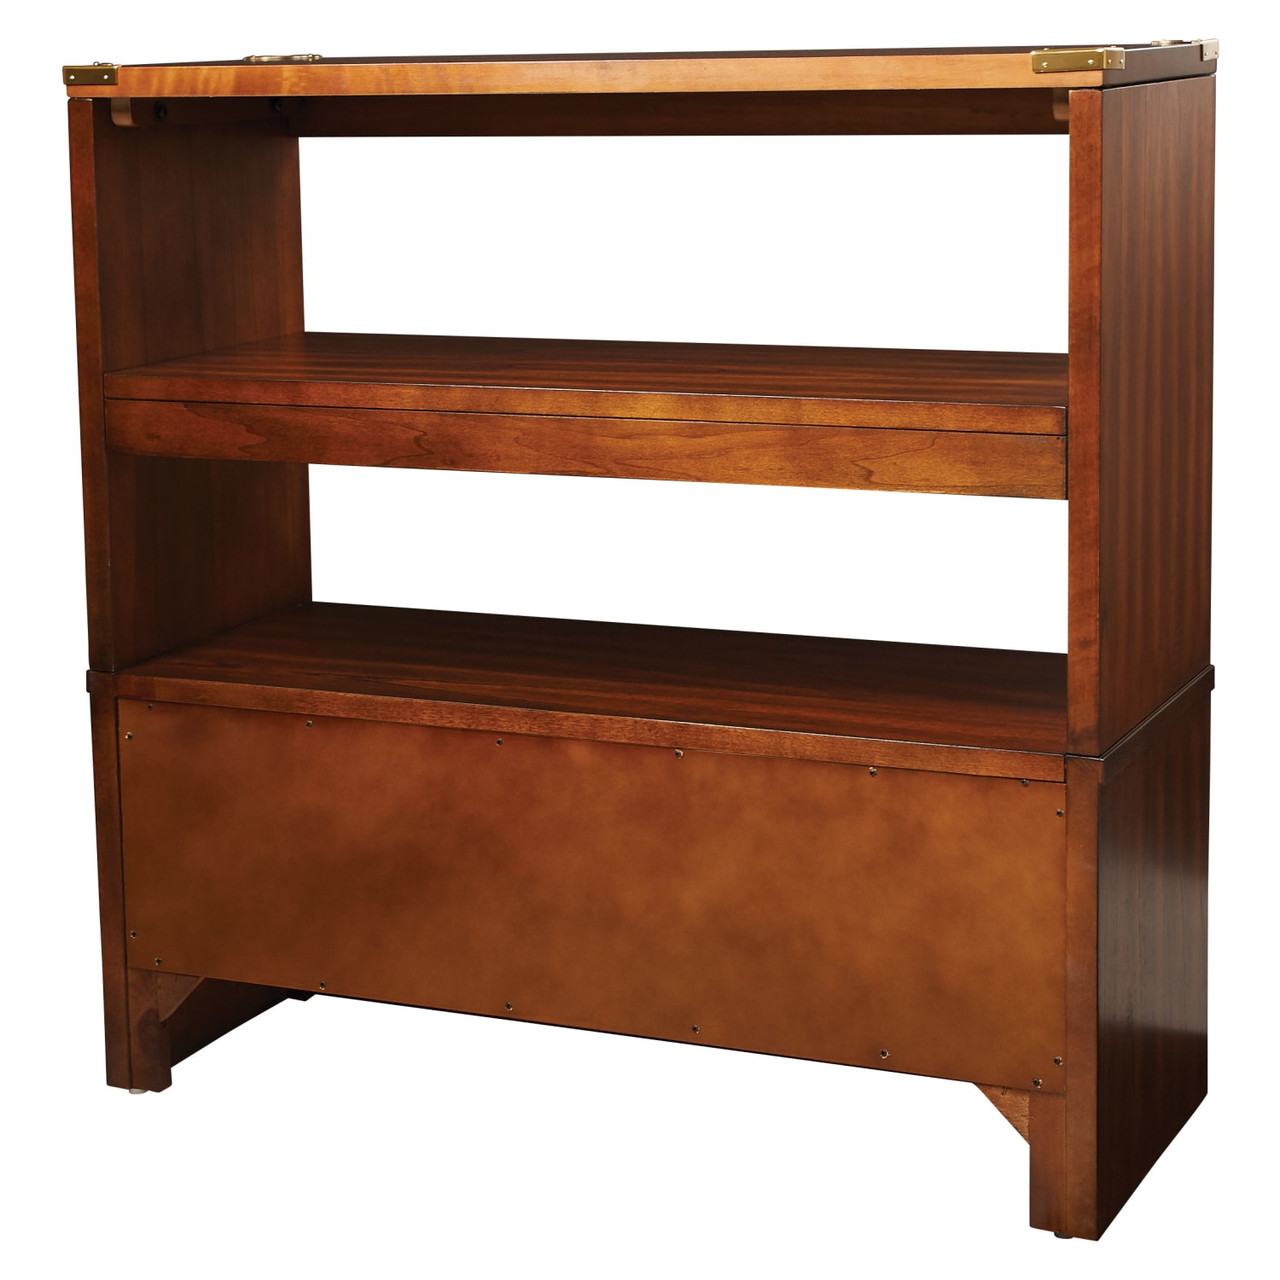 Wellington 36” Bookcase in Toasted Wheat